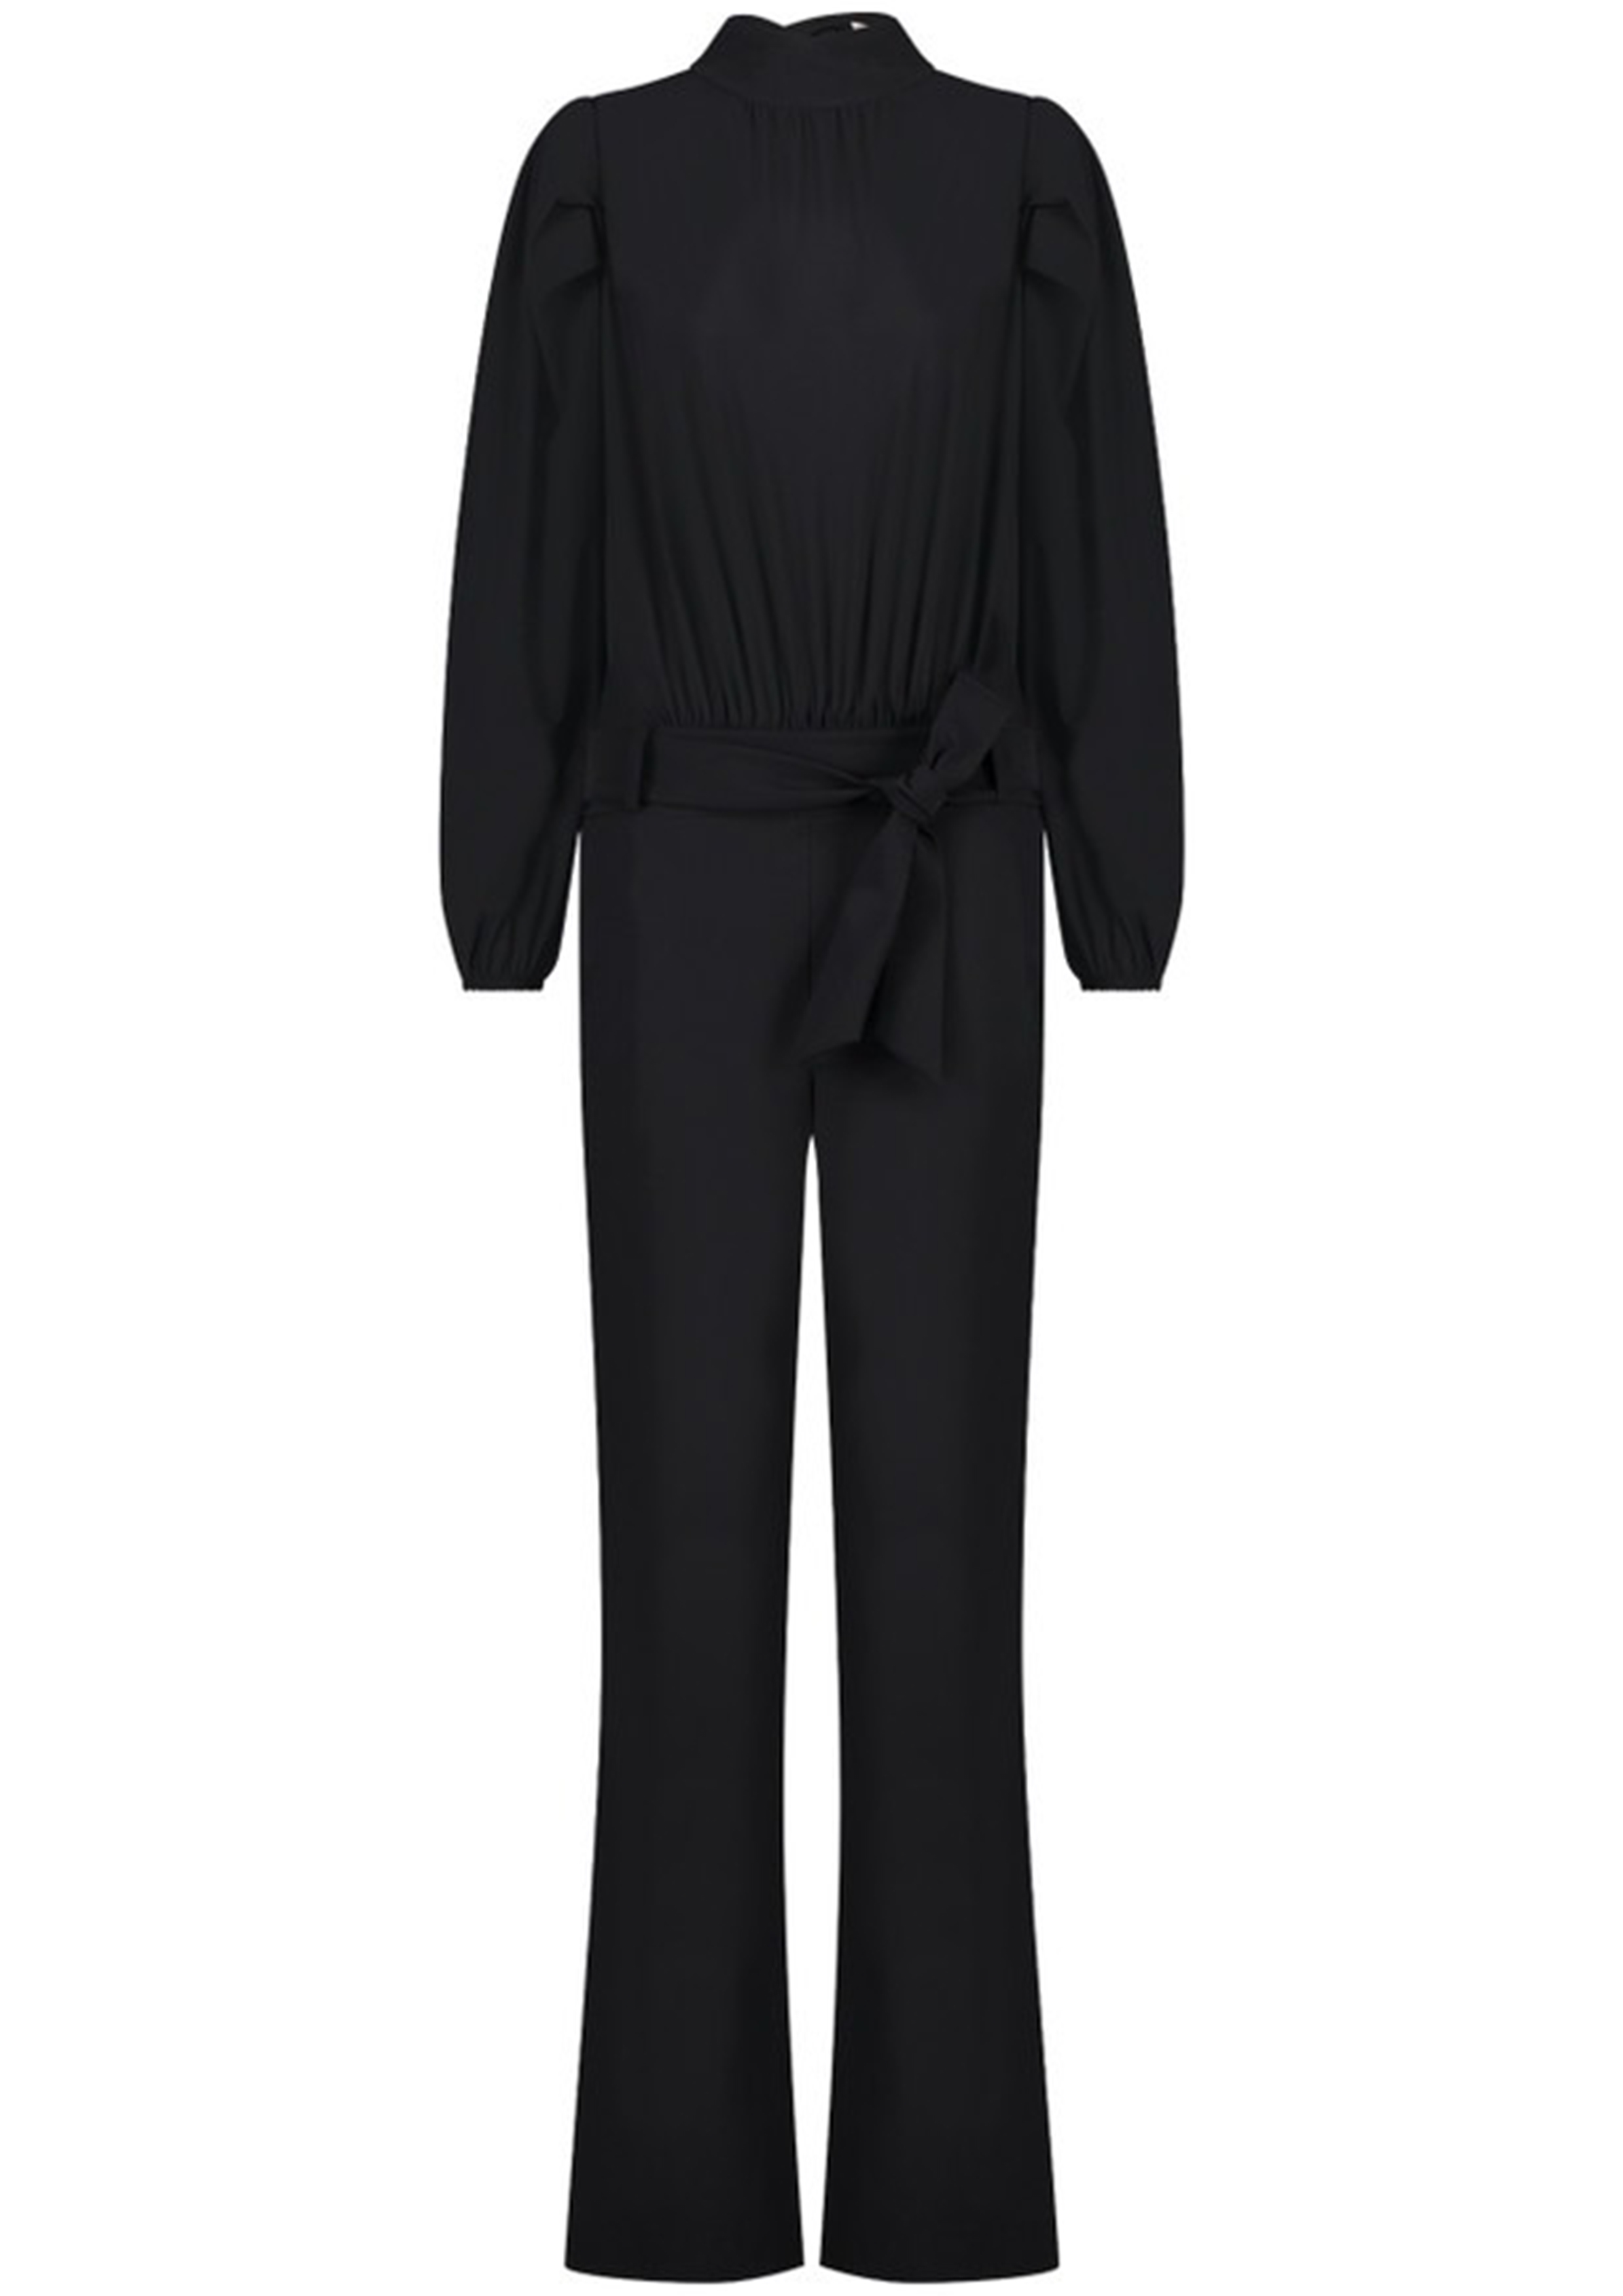 MORE of ME | Studio Anneloes, Bruno jumpsuit black Female Outfitters